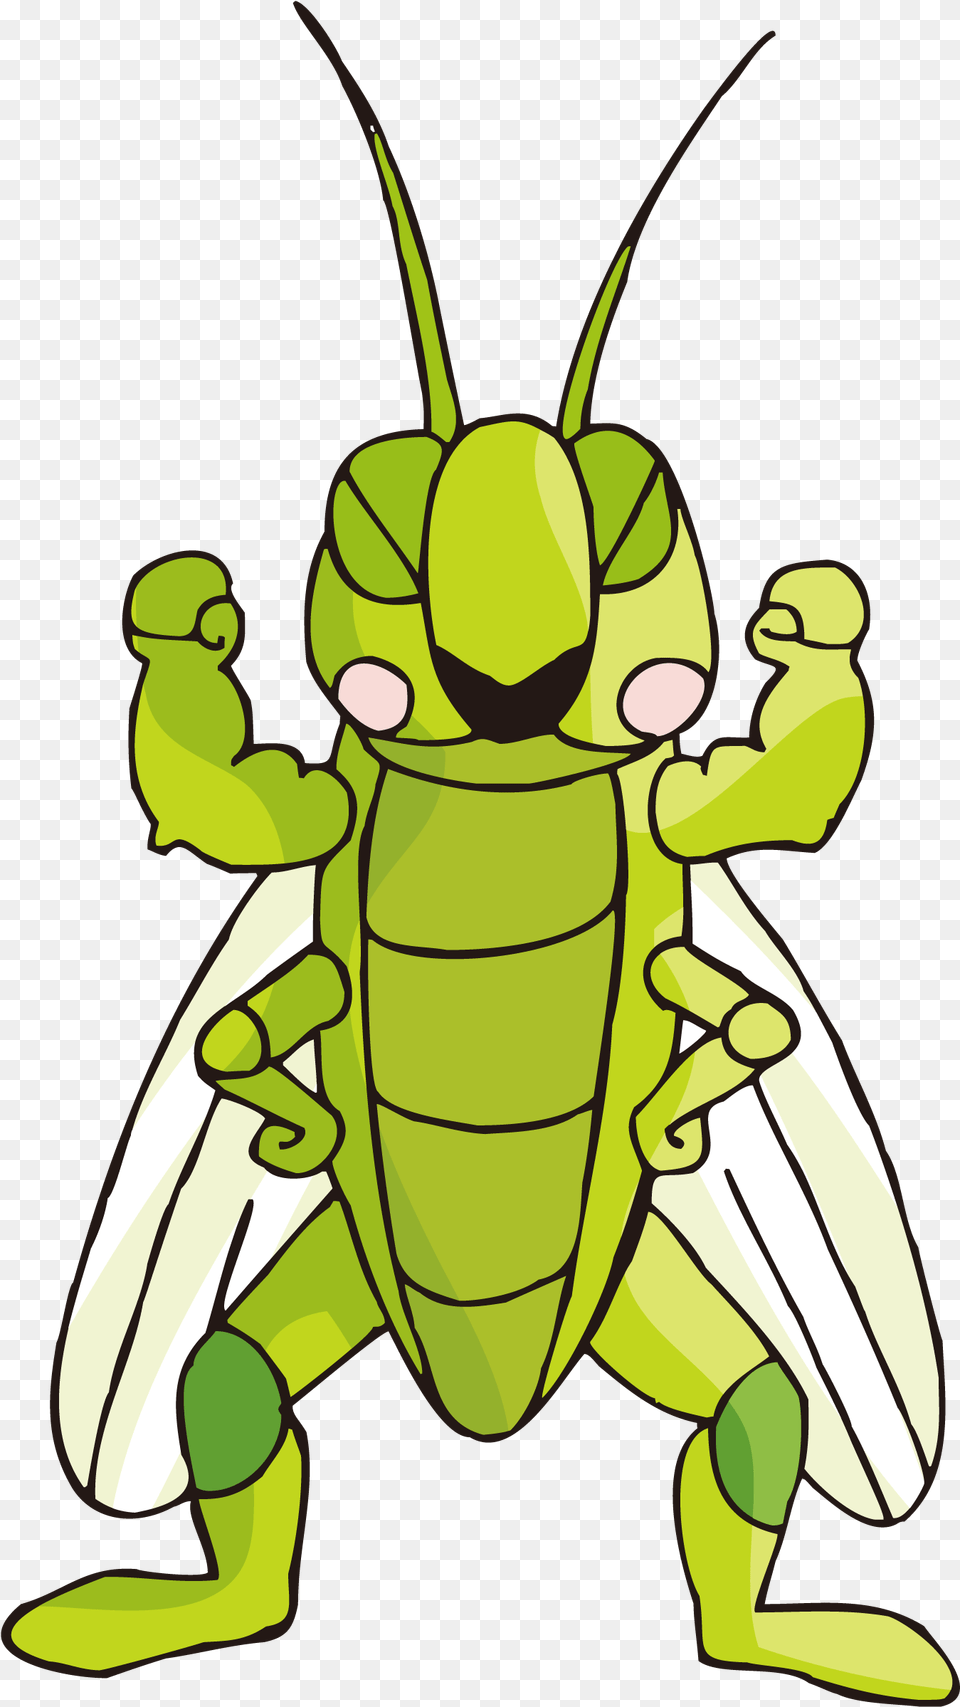 Cartoon Images Gallery For Insect Cartoon Cricket, Animal, Grasshopper, Invertebrate, Fish Png Image